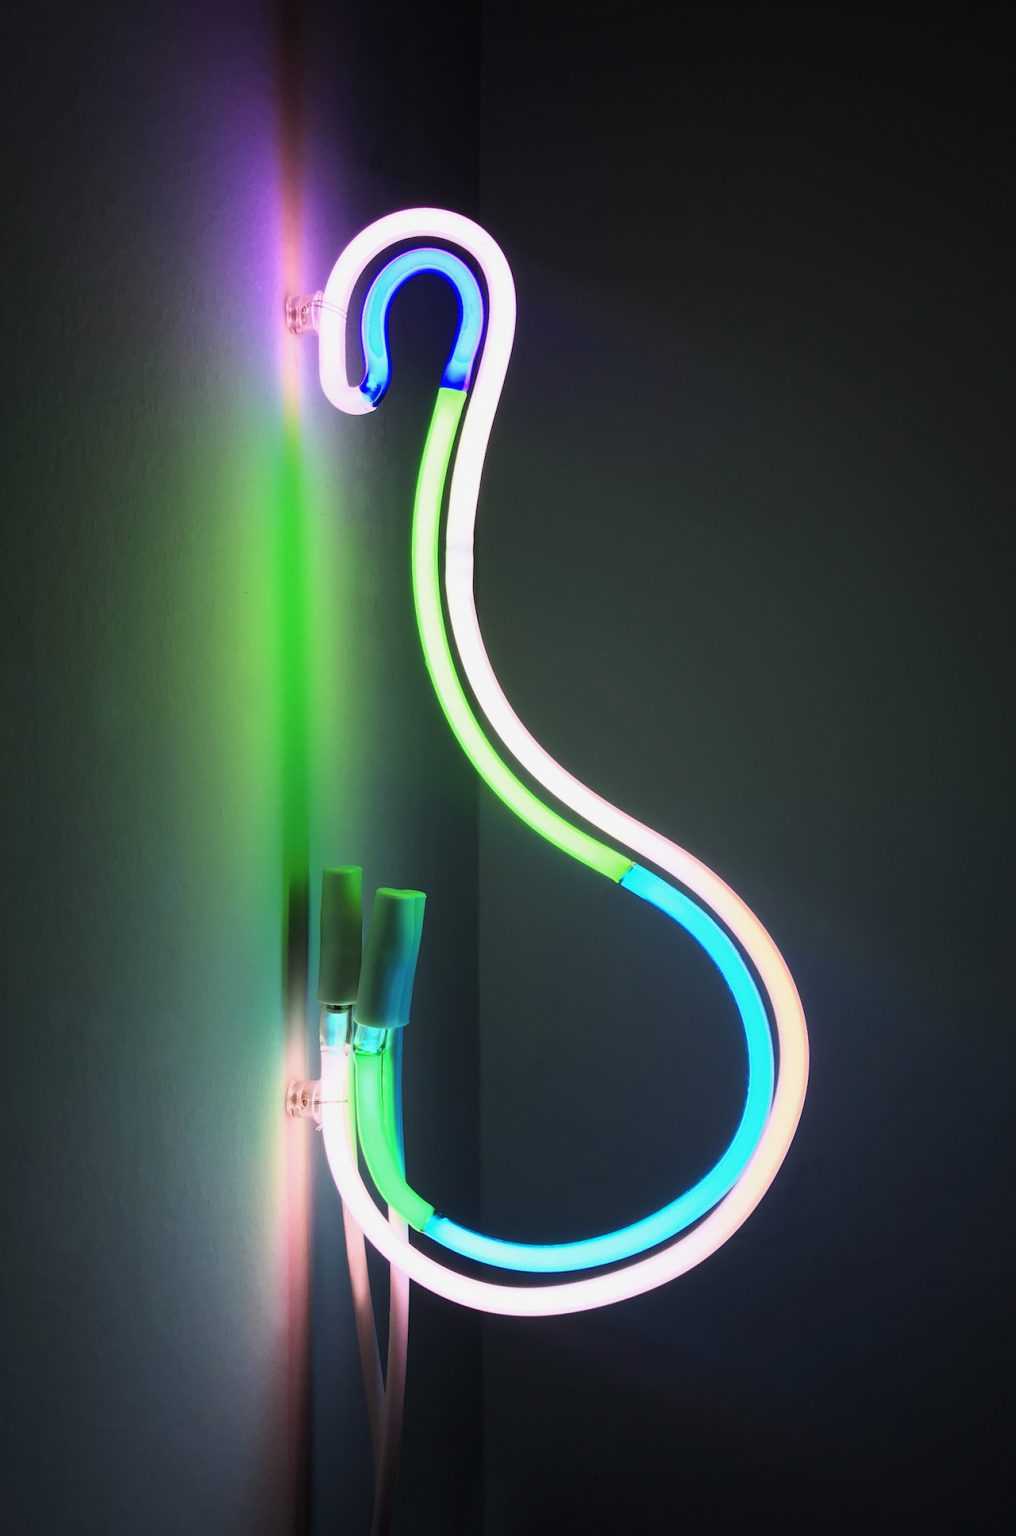 A Neon Lighting Collection Inspired by Otherworldly Concepts